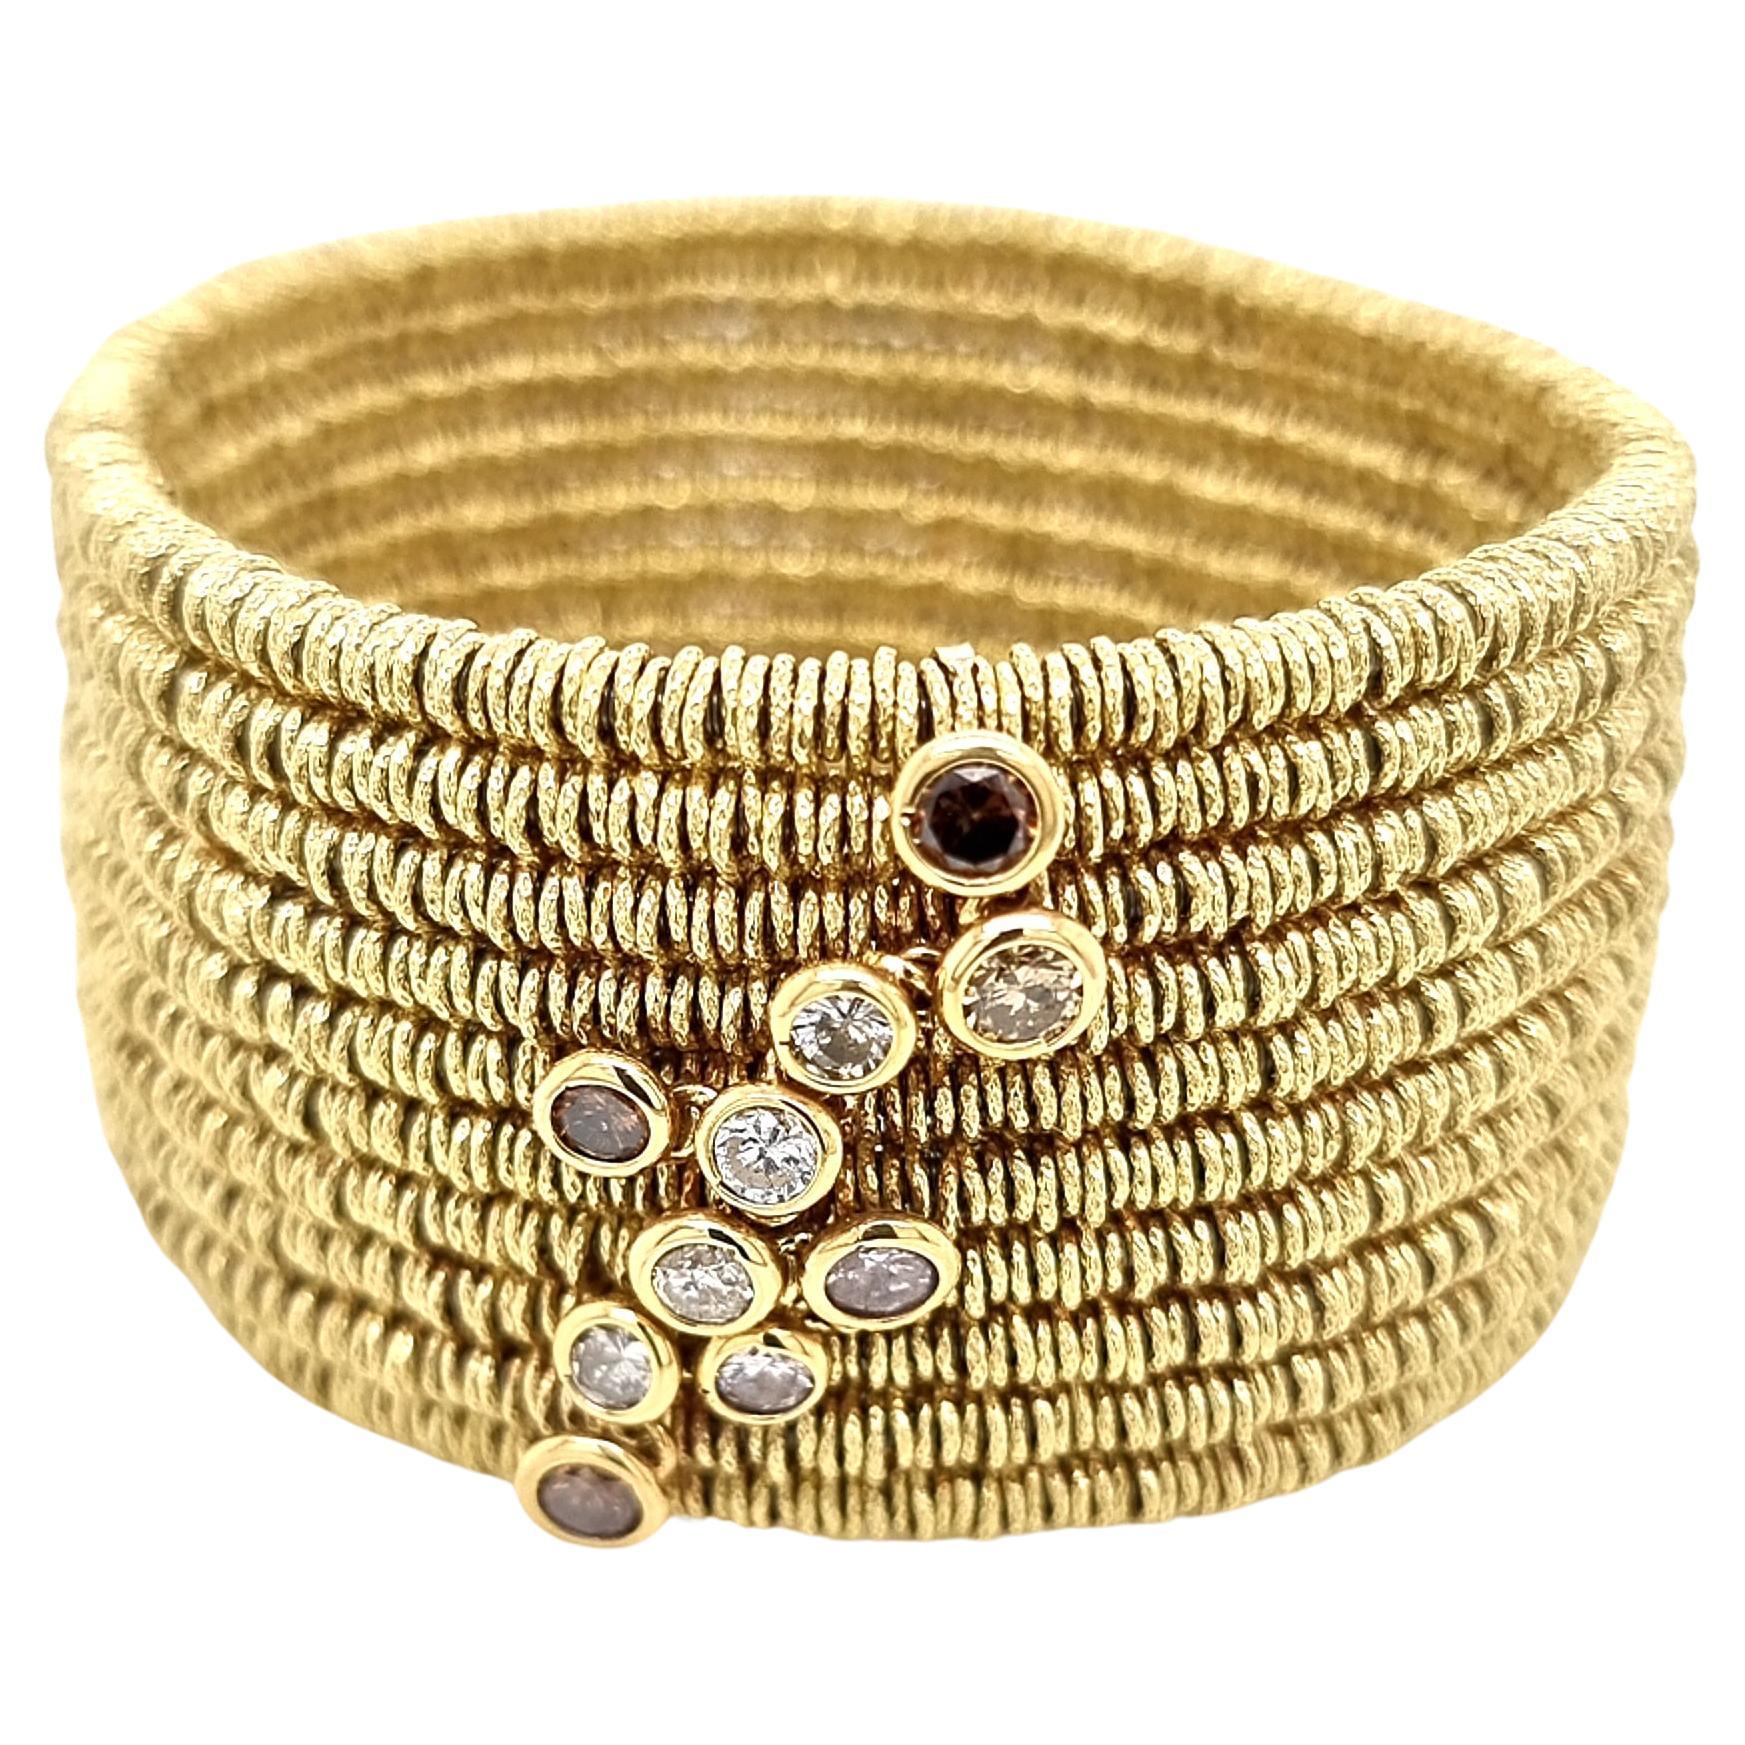 Wide Bracelet with 18k Gold, Elements of Steel and Diamonds by Roberto Demeglio For Sale